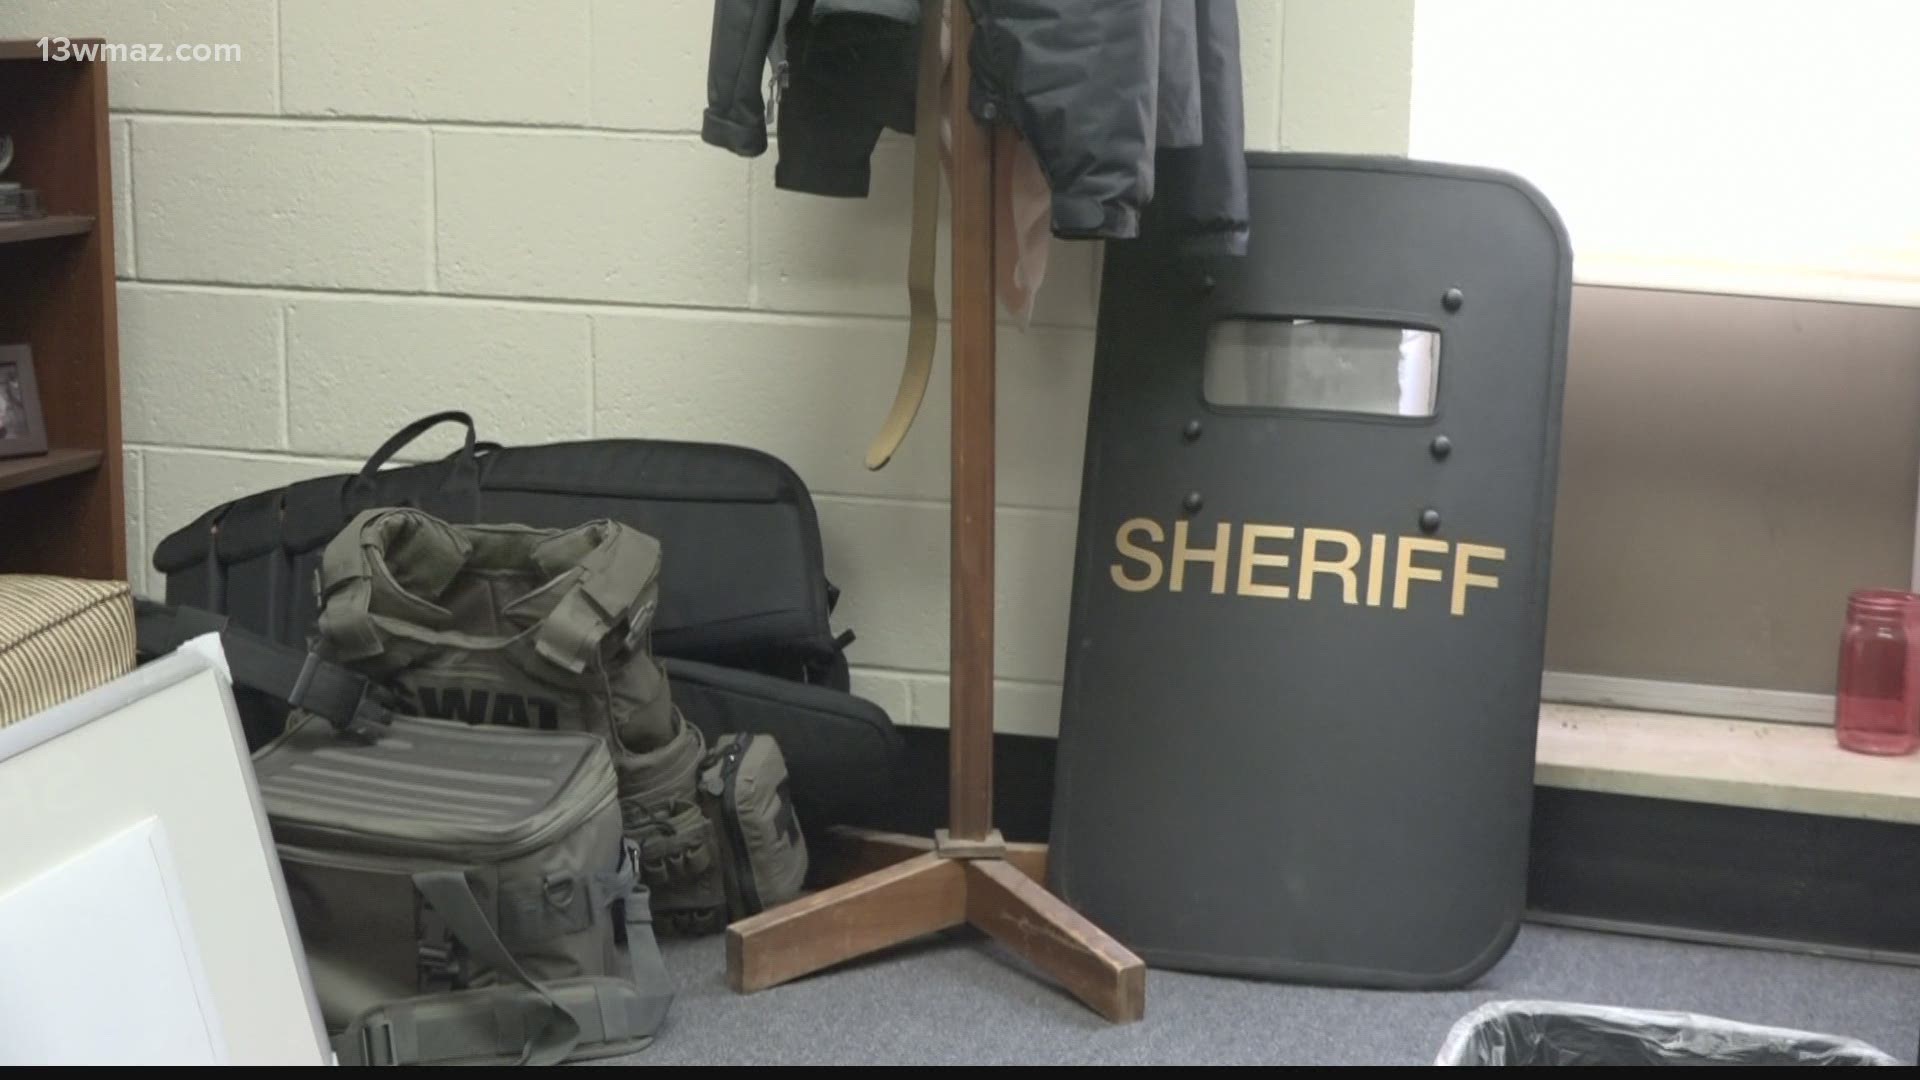 Training occurs regularly, to keep deputies practiced and ready for different scenarios.